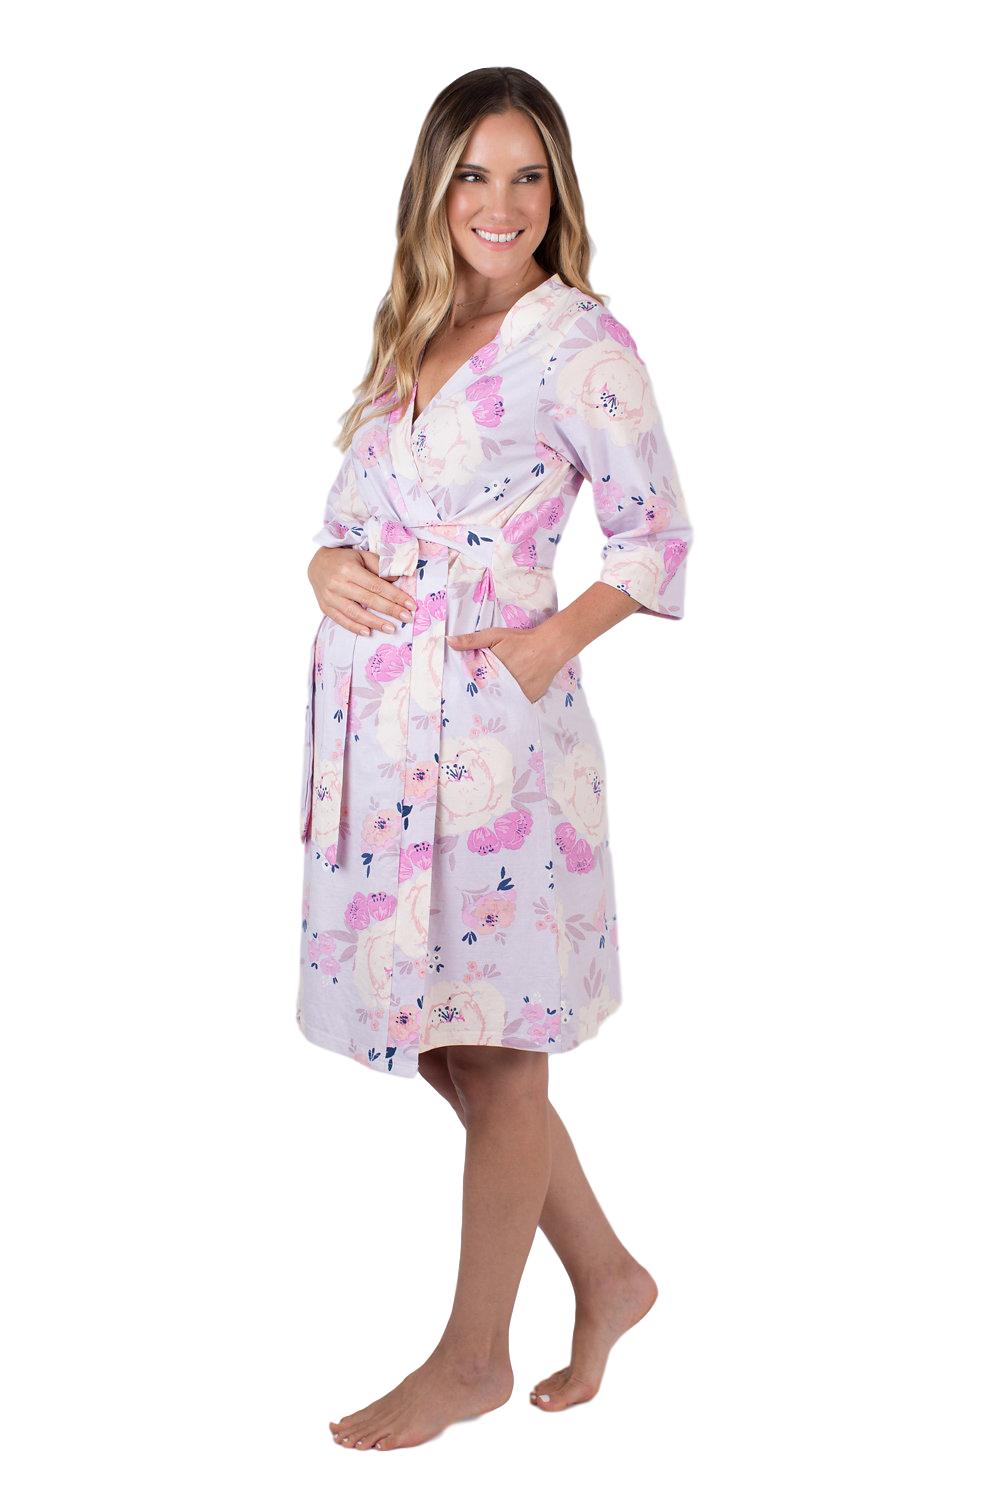 Purple Floral Maternity Nursing Delivery Robe For Hospital Stay